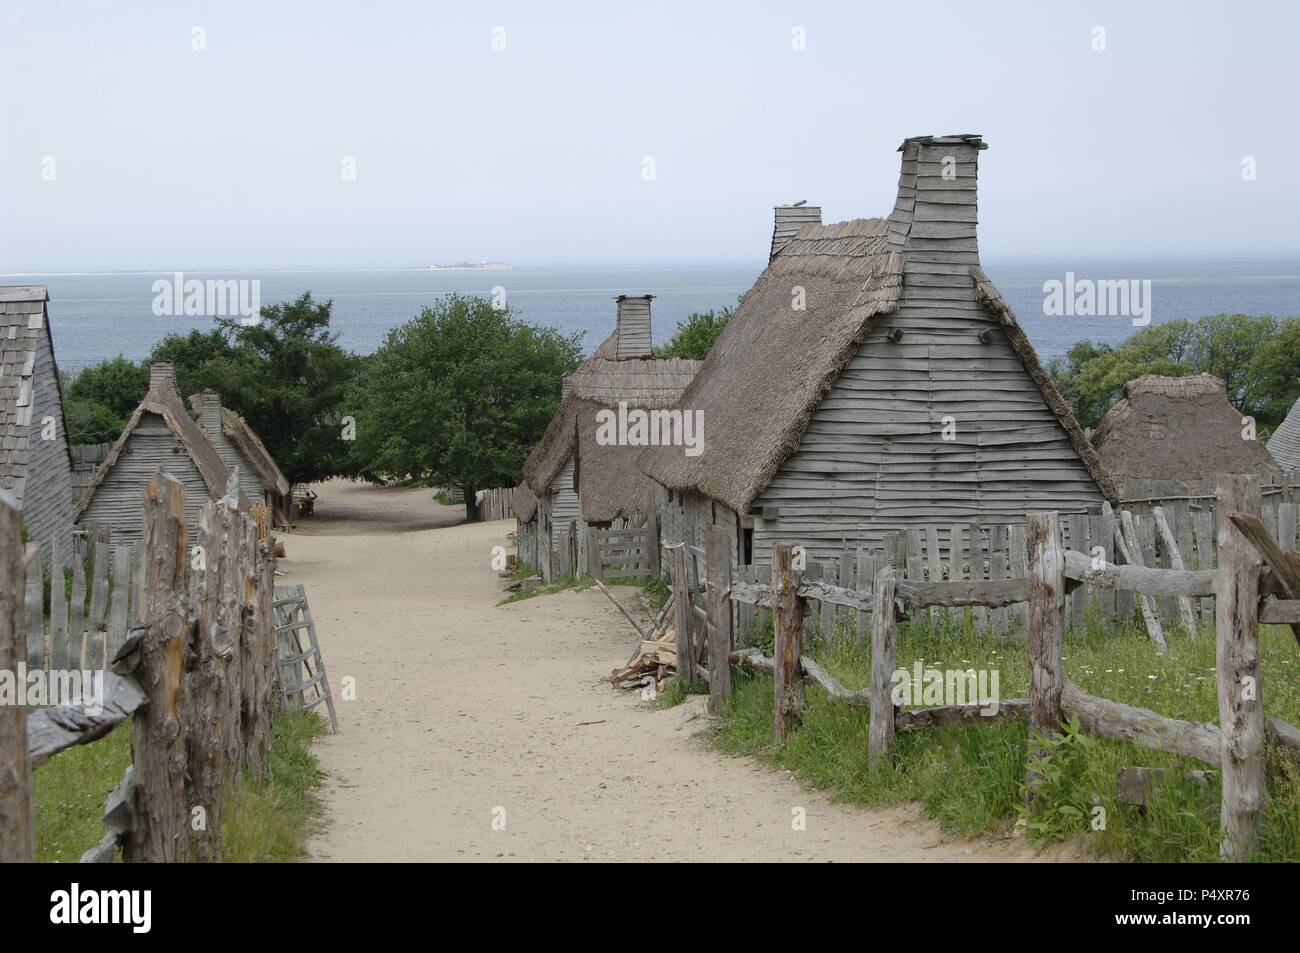 Plimoth Plantation or Historical Museum. Is a living museum in that shows the original settlement of the Plymouth Colony established in the 17th century by English colonists. English village. Plymouth. Massachusetts. United States. Stock Photo